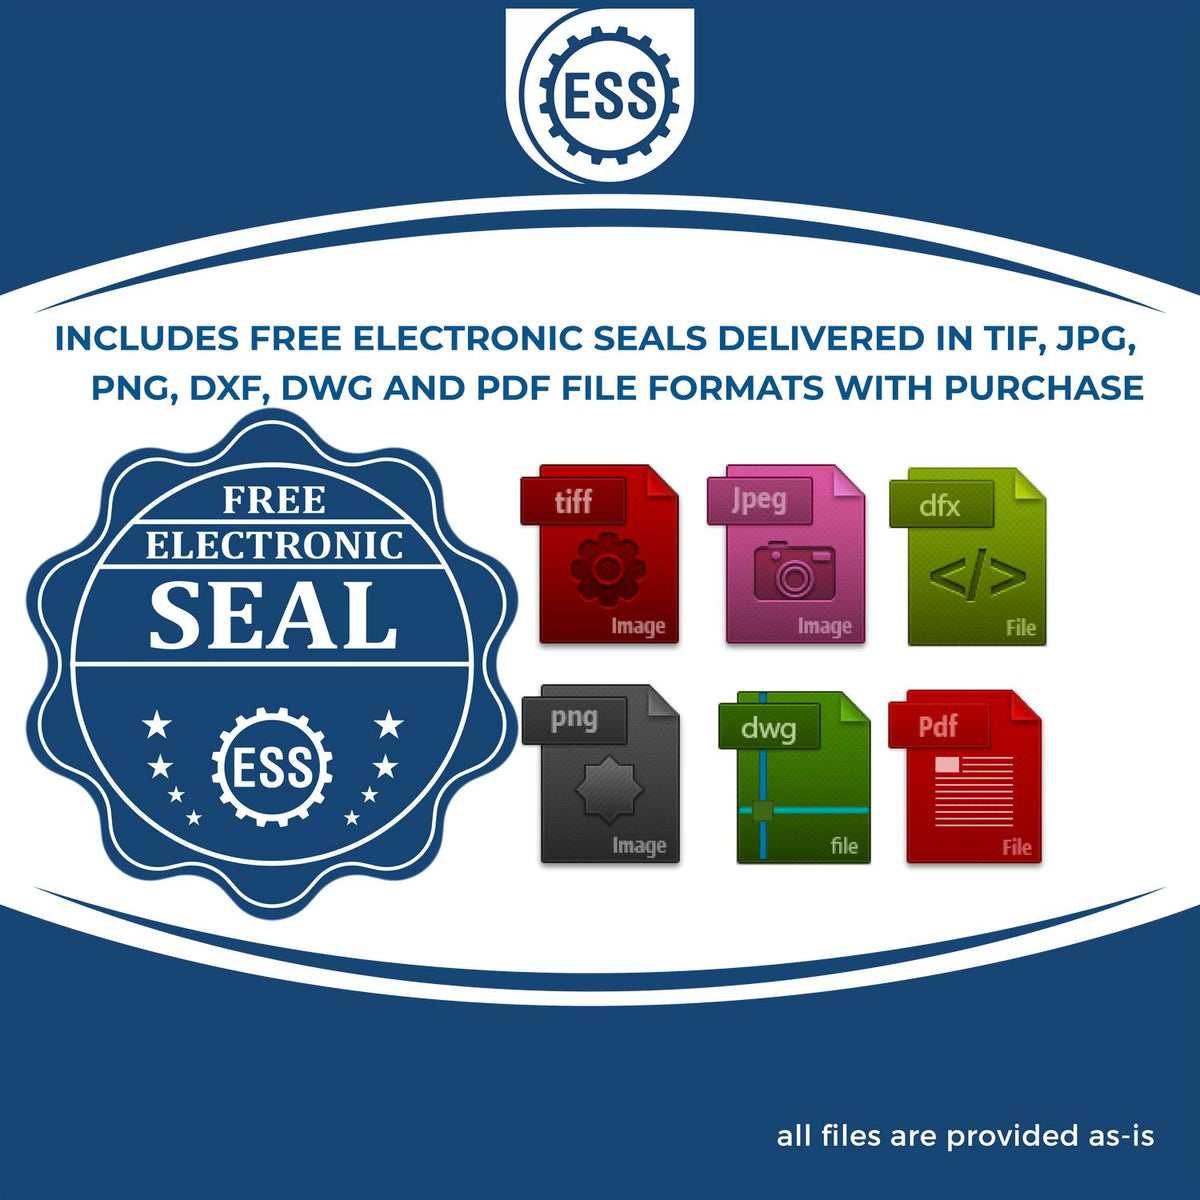 An infographic for the free electronic seal for the Slim Pre-Inked Colorado Land Surveyor Seal Stamp illustrating the different file type icons such as DXF, DWG, TIF, JPG and PNG.